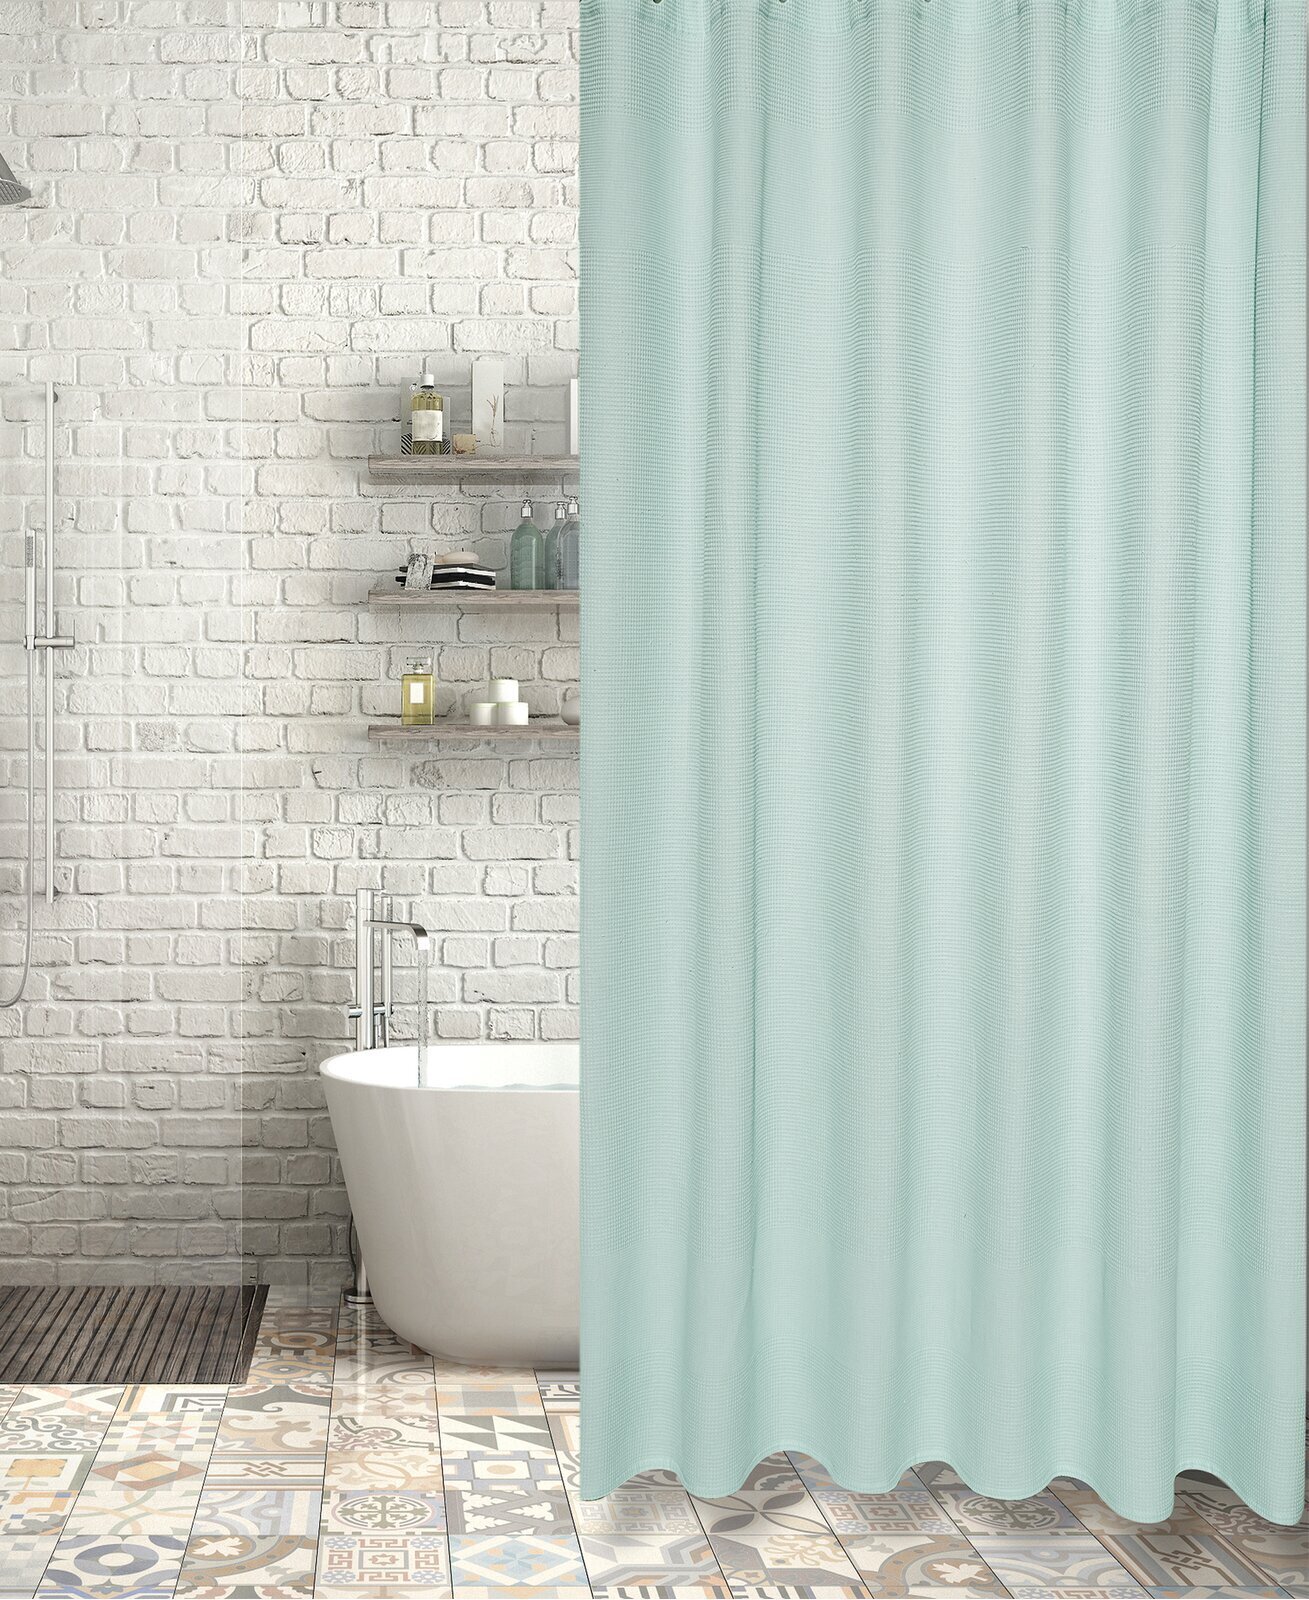 Luxury shower curtain in an accent color